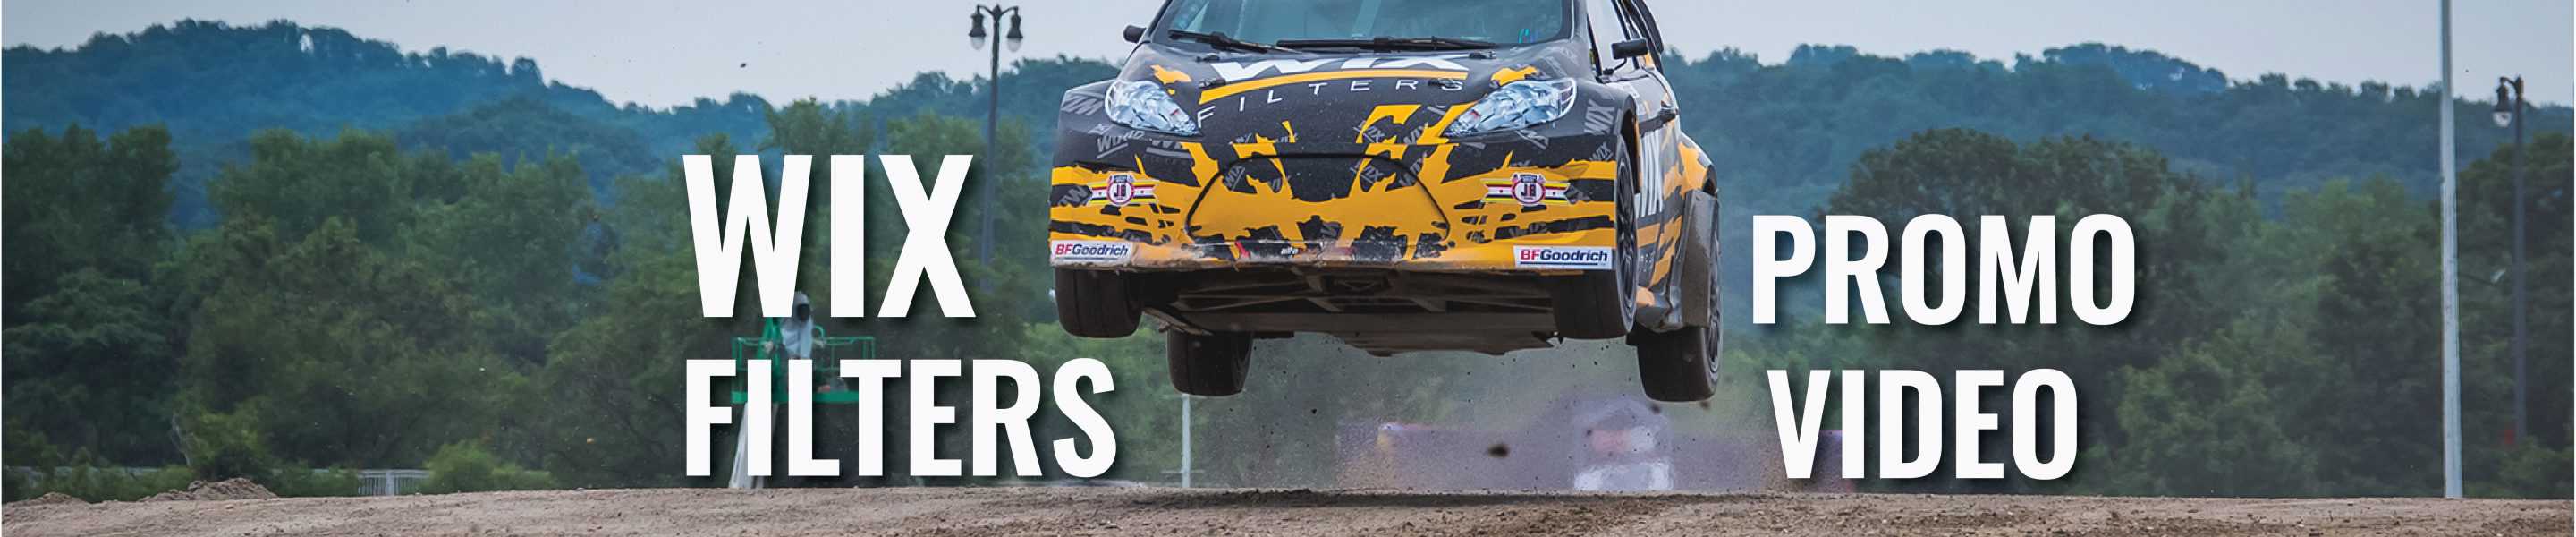 WIX Filters GRC Racing Promo Video